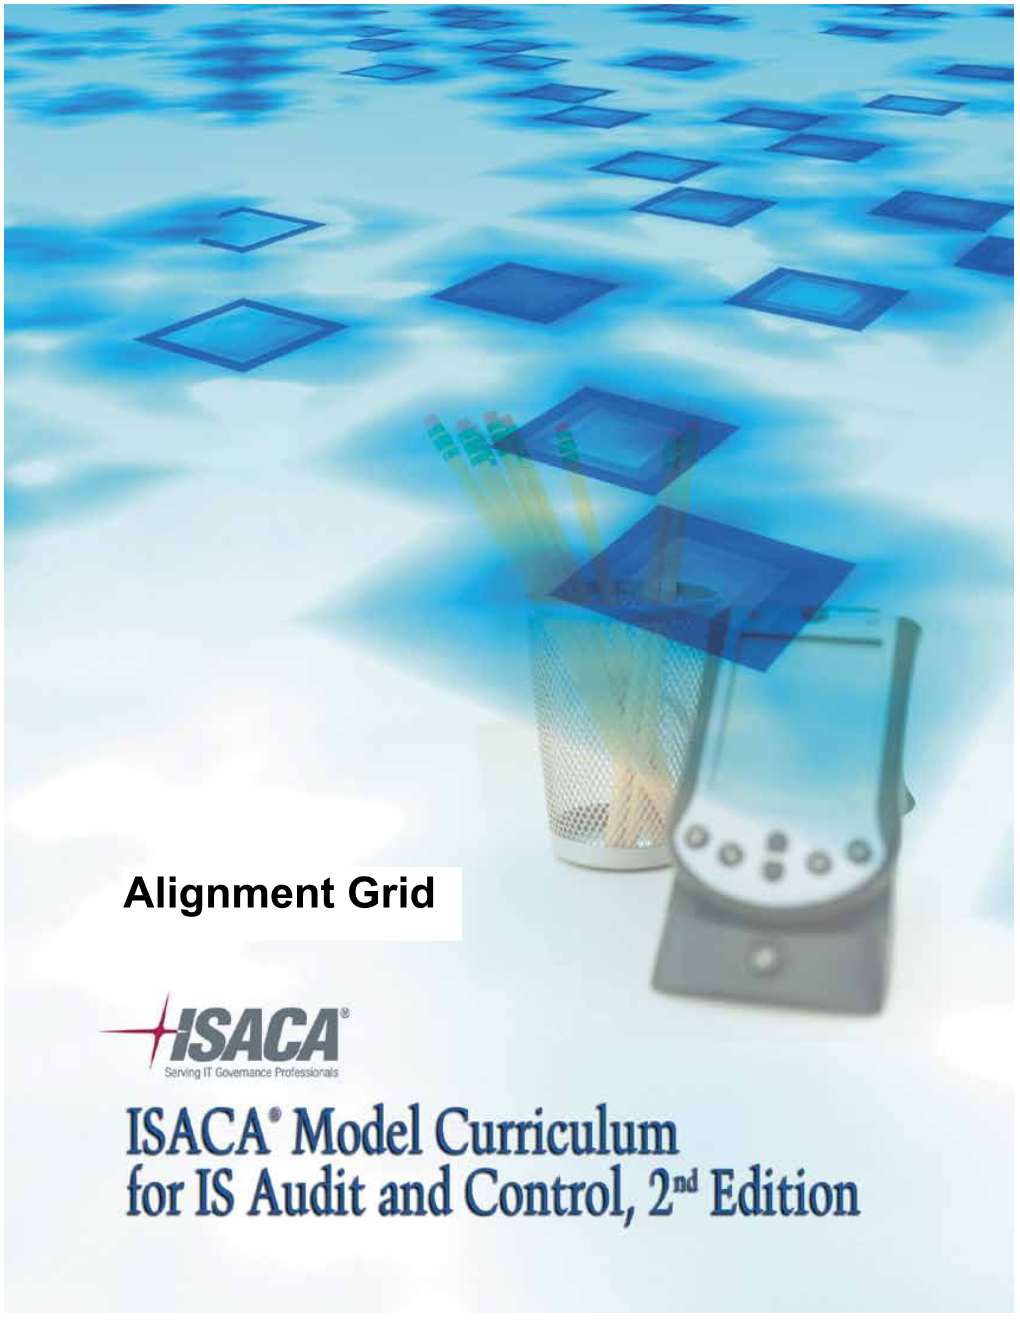 ISACA Model Curriculum for IS Audt and Control